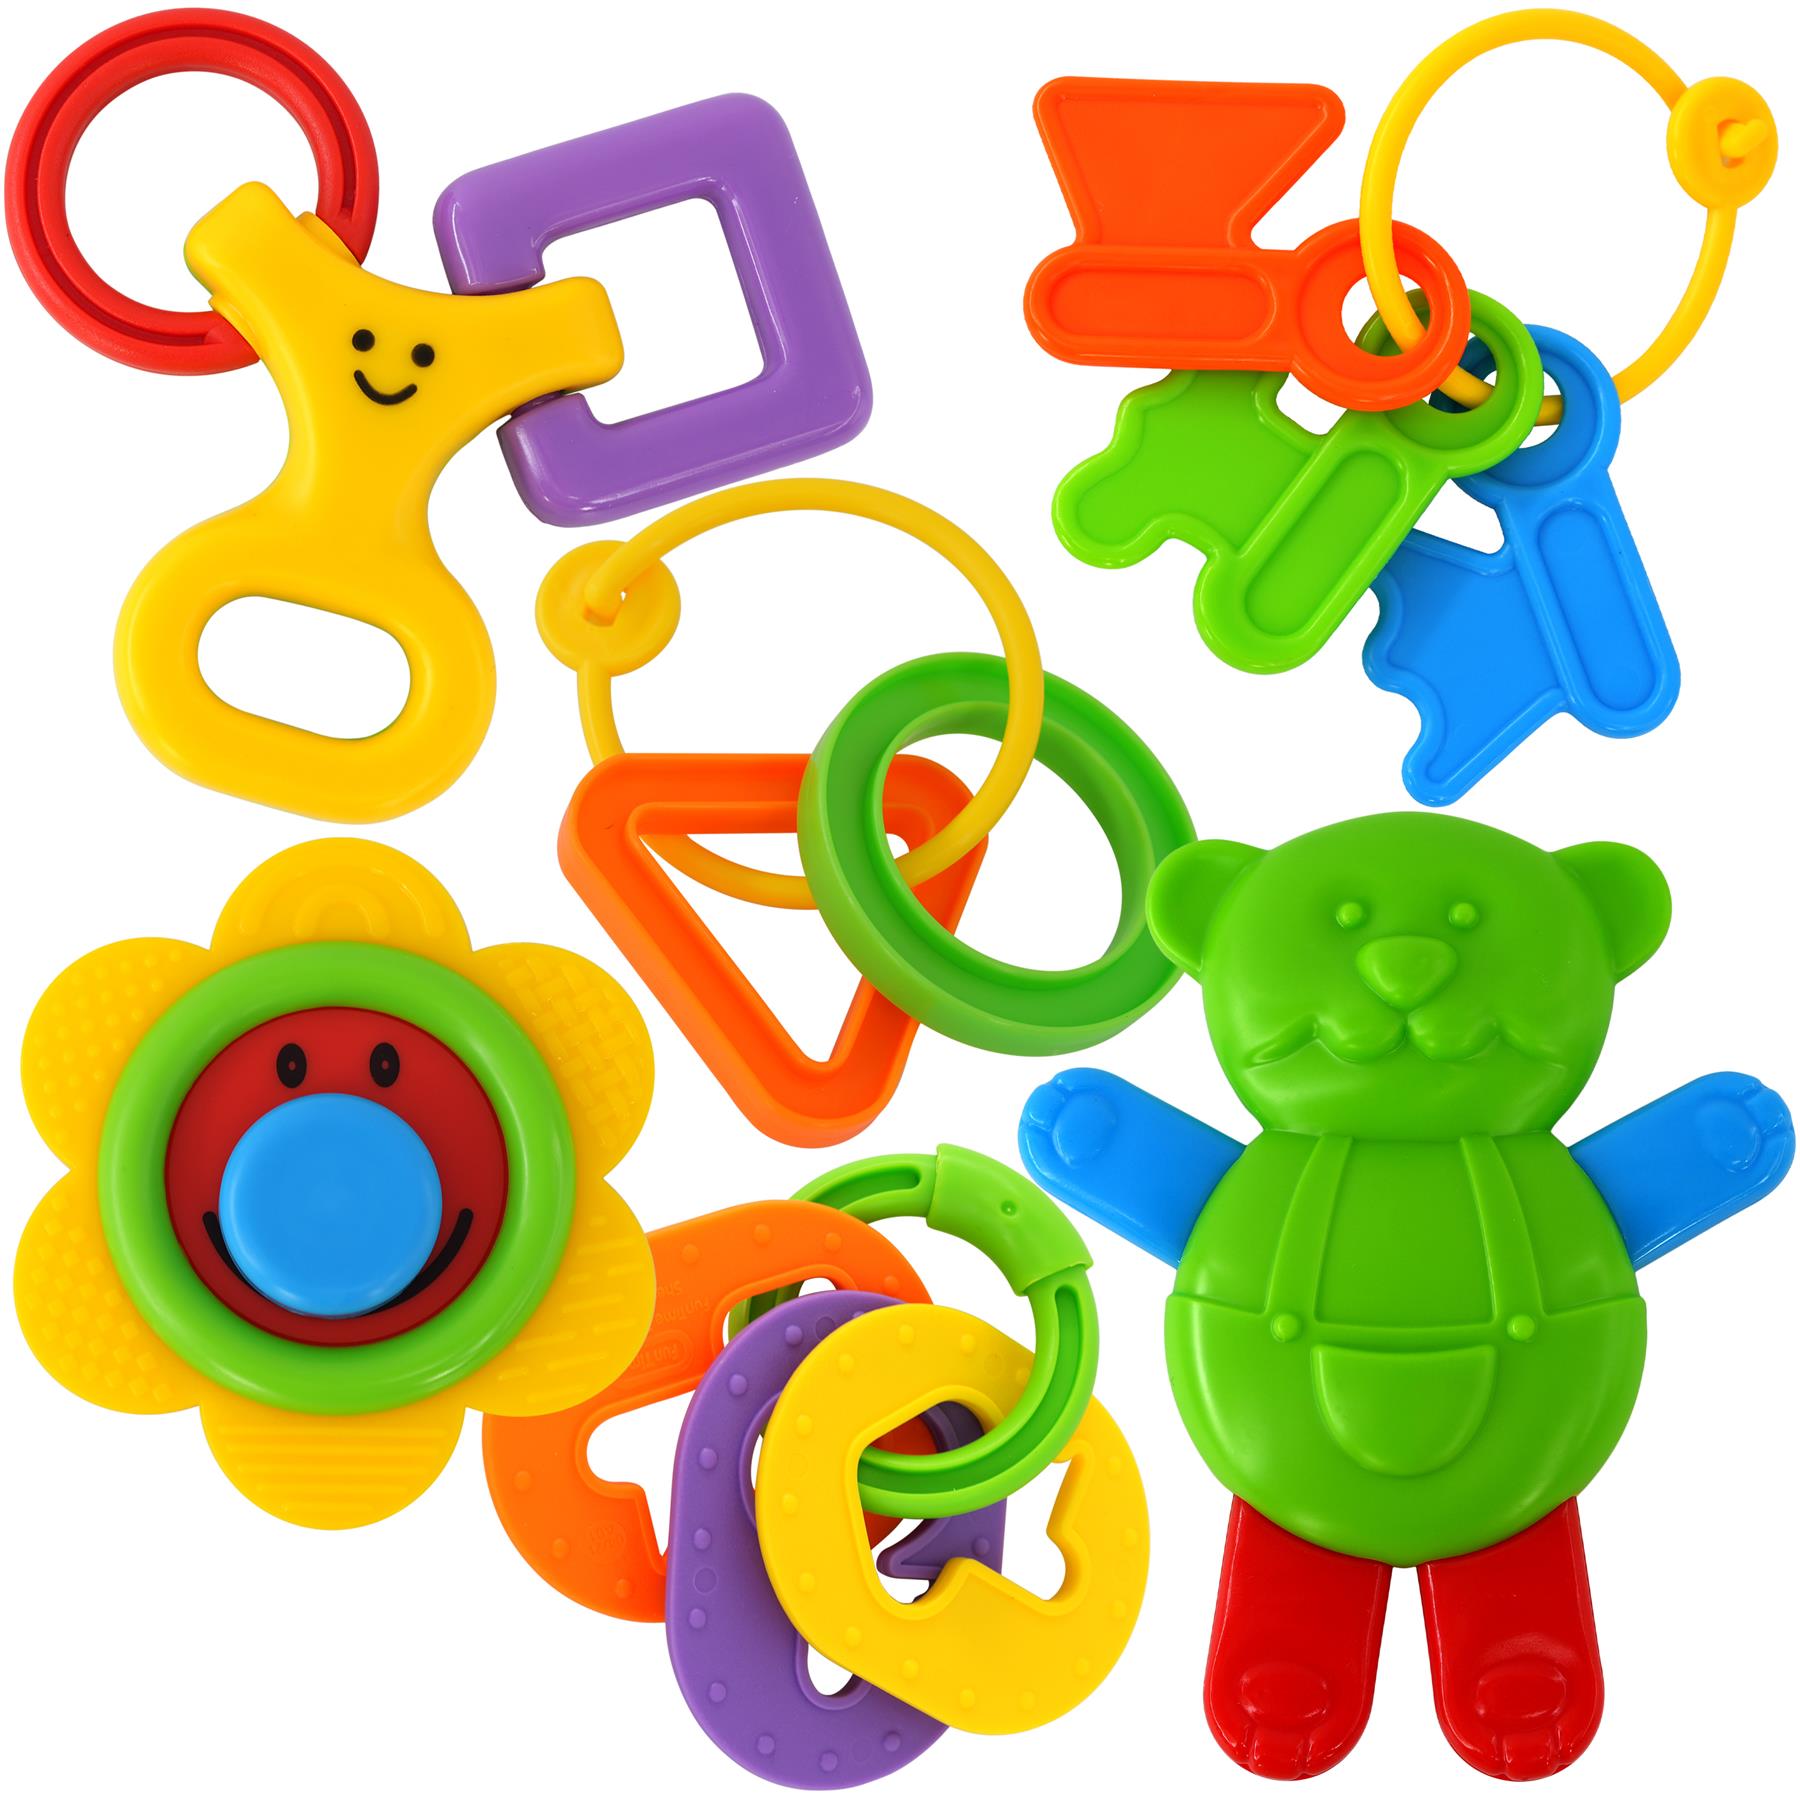 Baby Rattles And Teethers by The Magic Toy Shop - The Magic Toy Shop